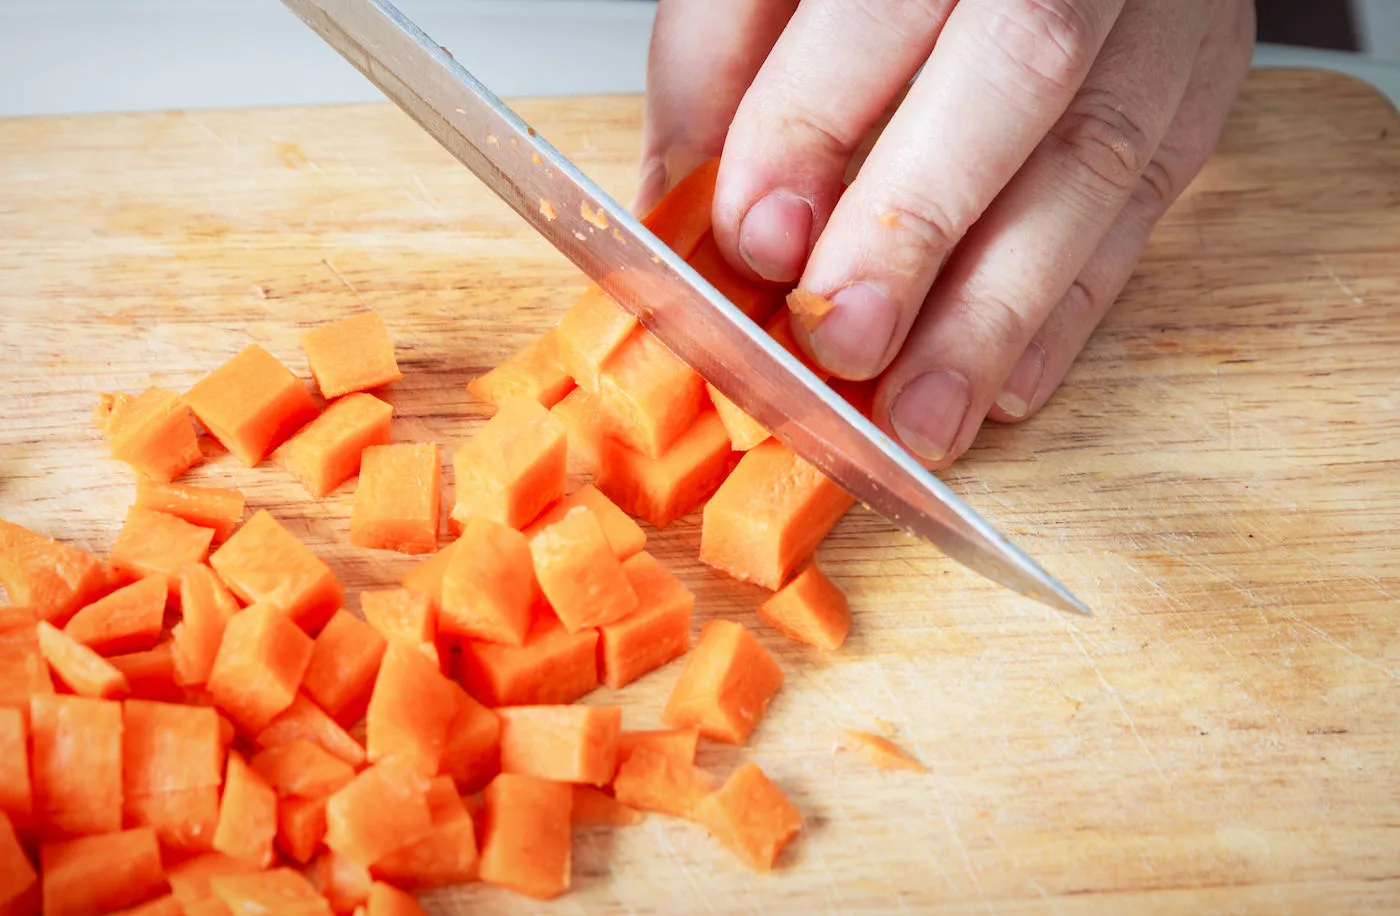 Woman hands chopping carrot on wooden board